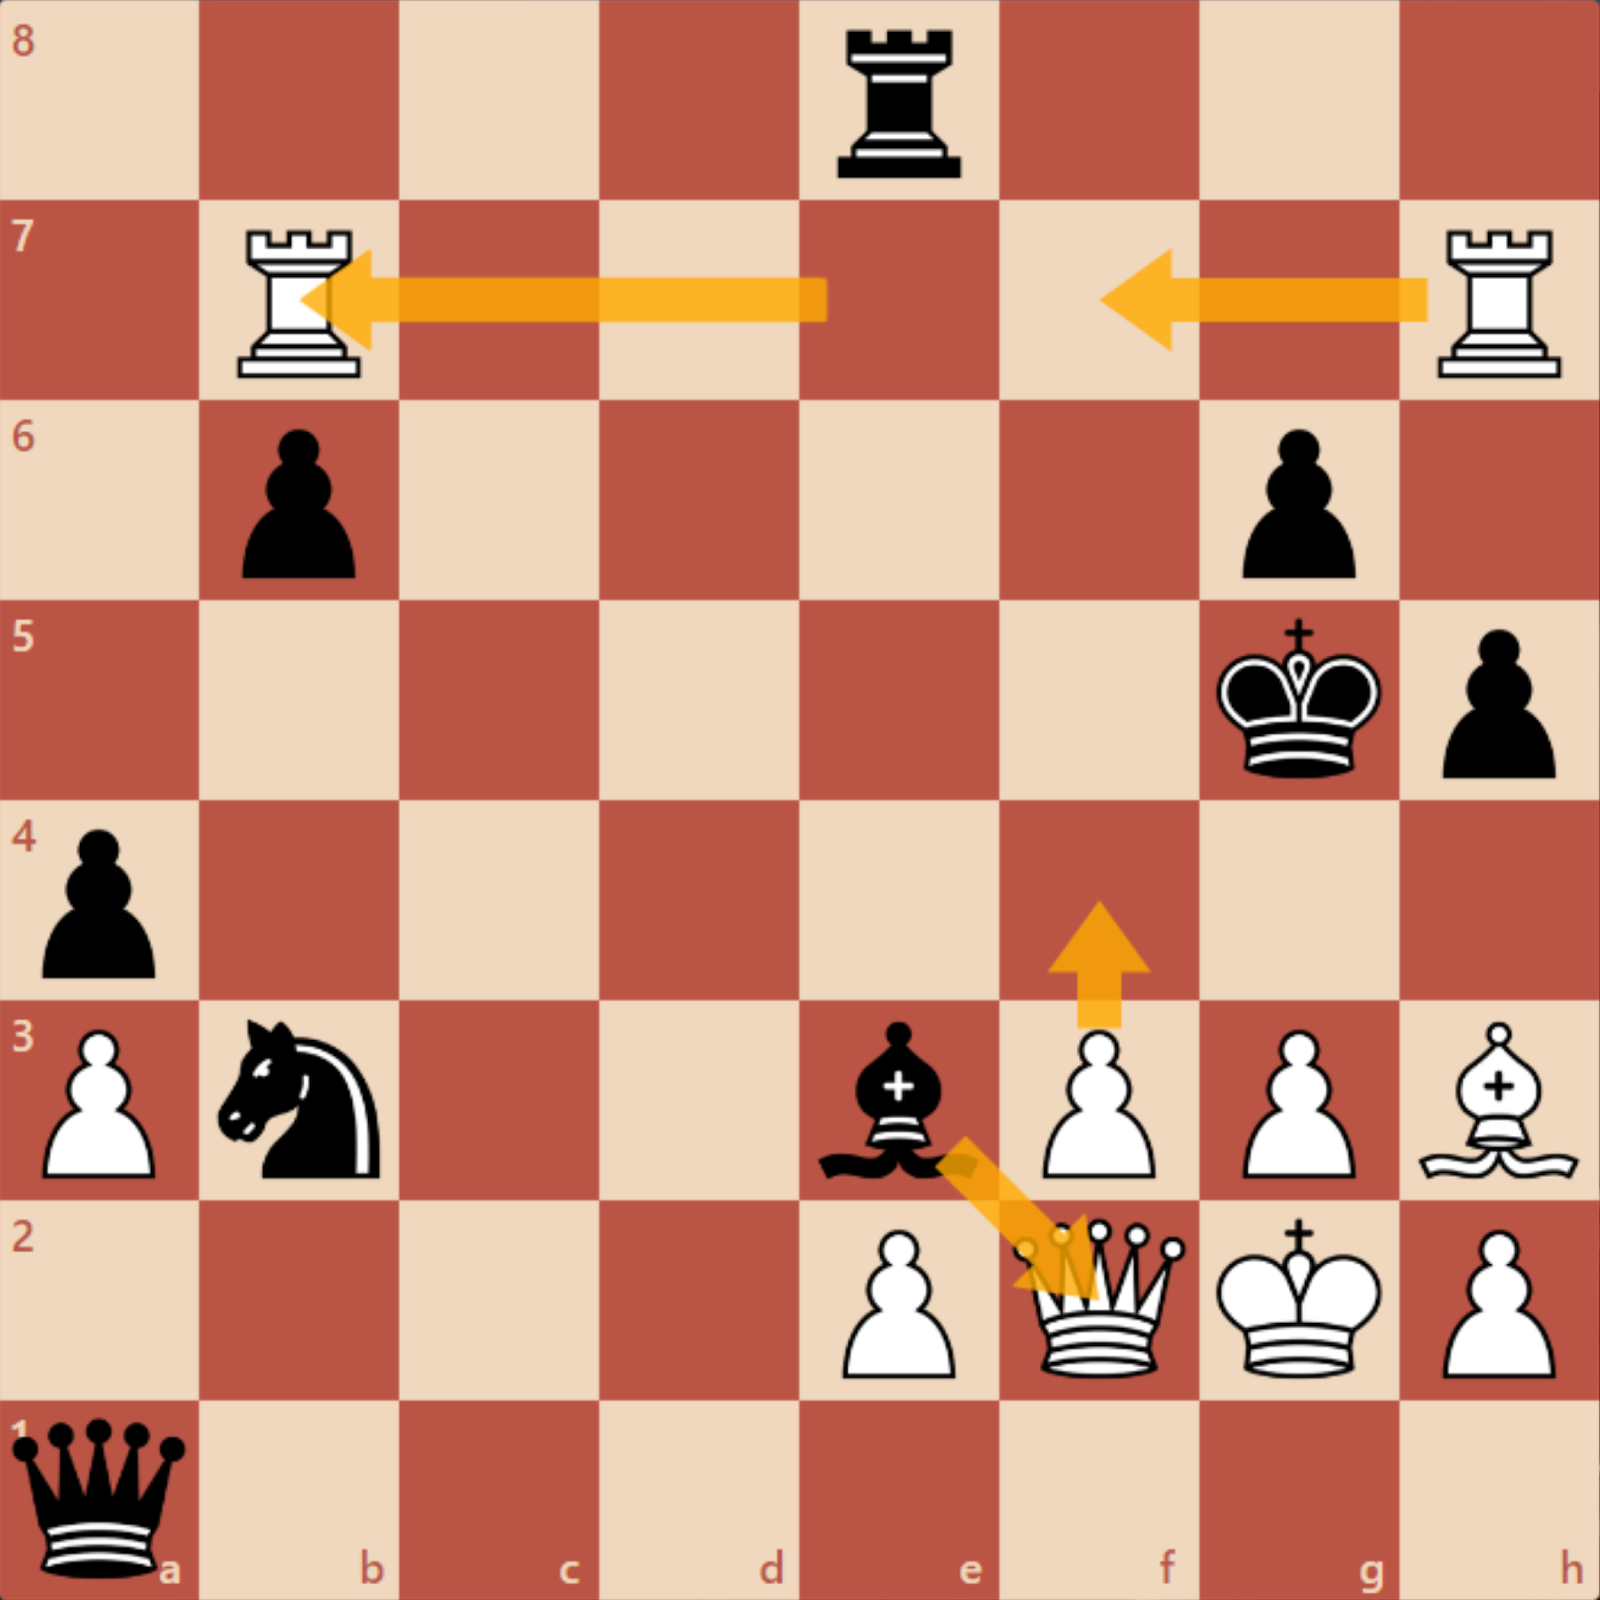 2020 Airthings Wesley So vs Daniil Dubov. Can You Spot The Move Of